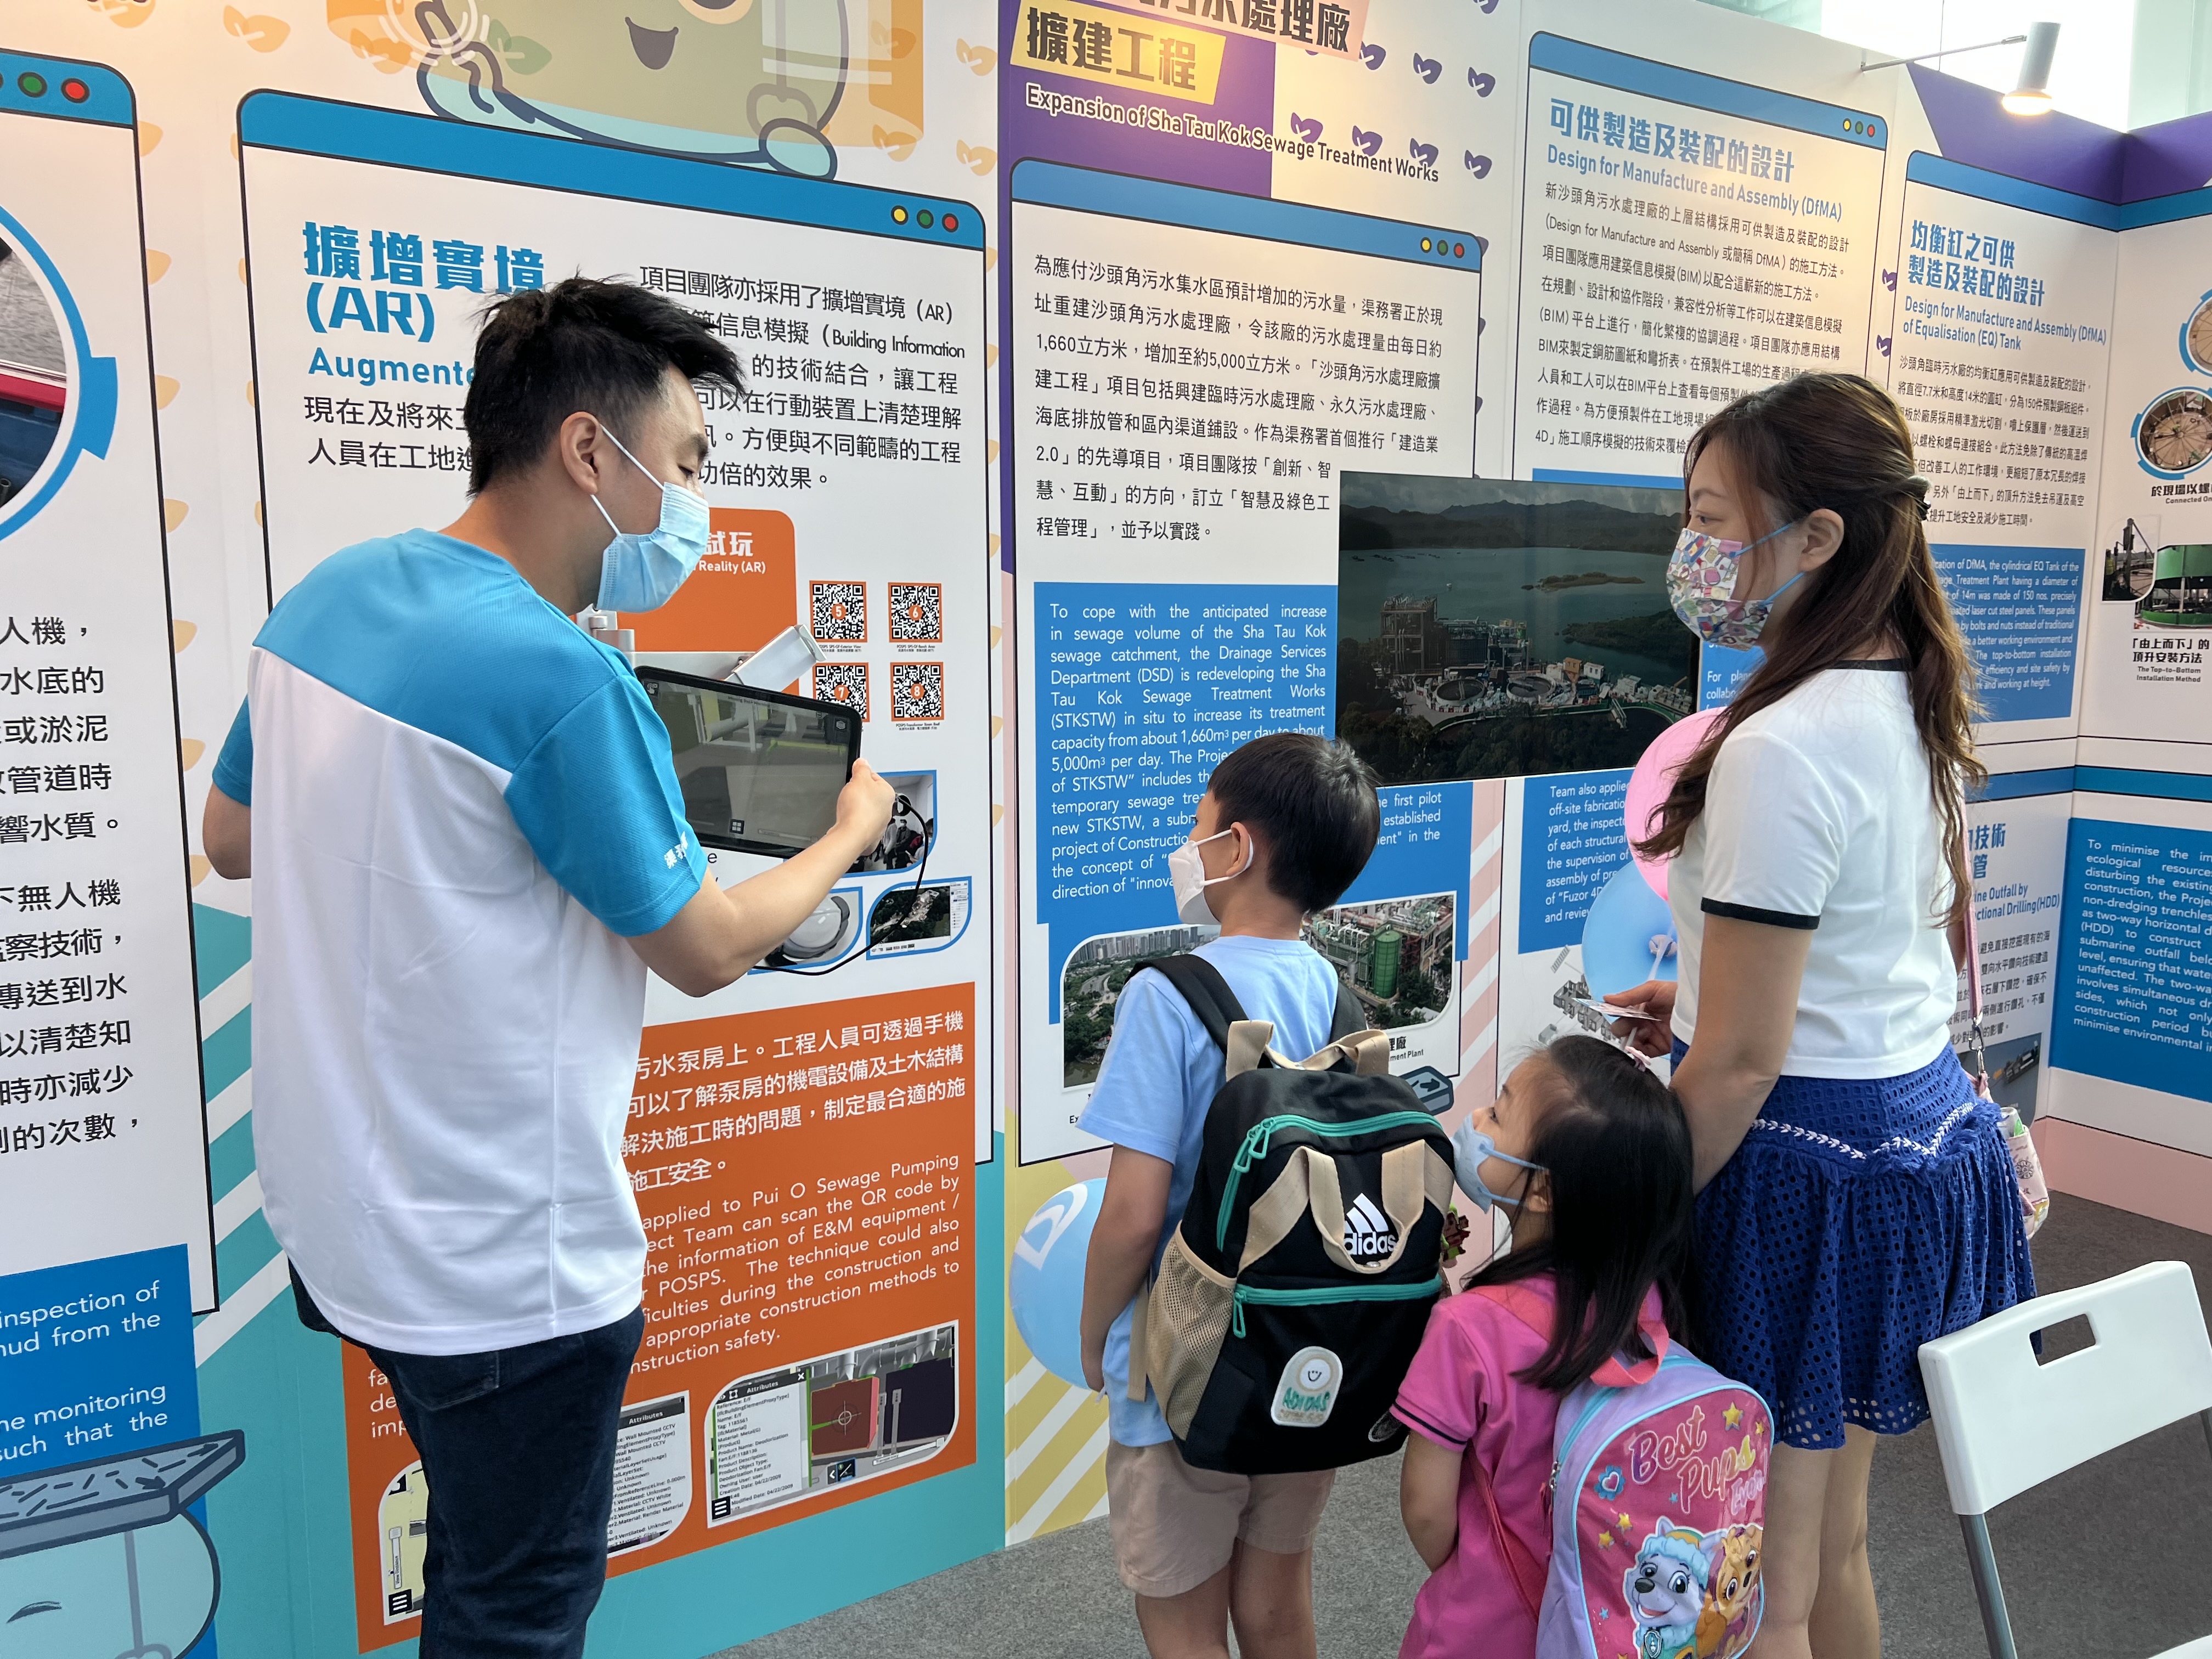 The trial of Augmented Reality (AR) enabling the public to learn more about the innovative technologies adopted in our works project